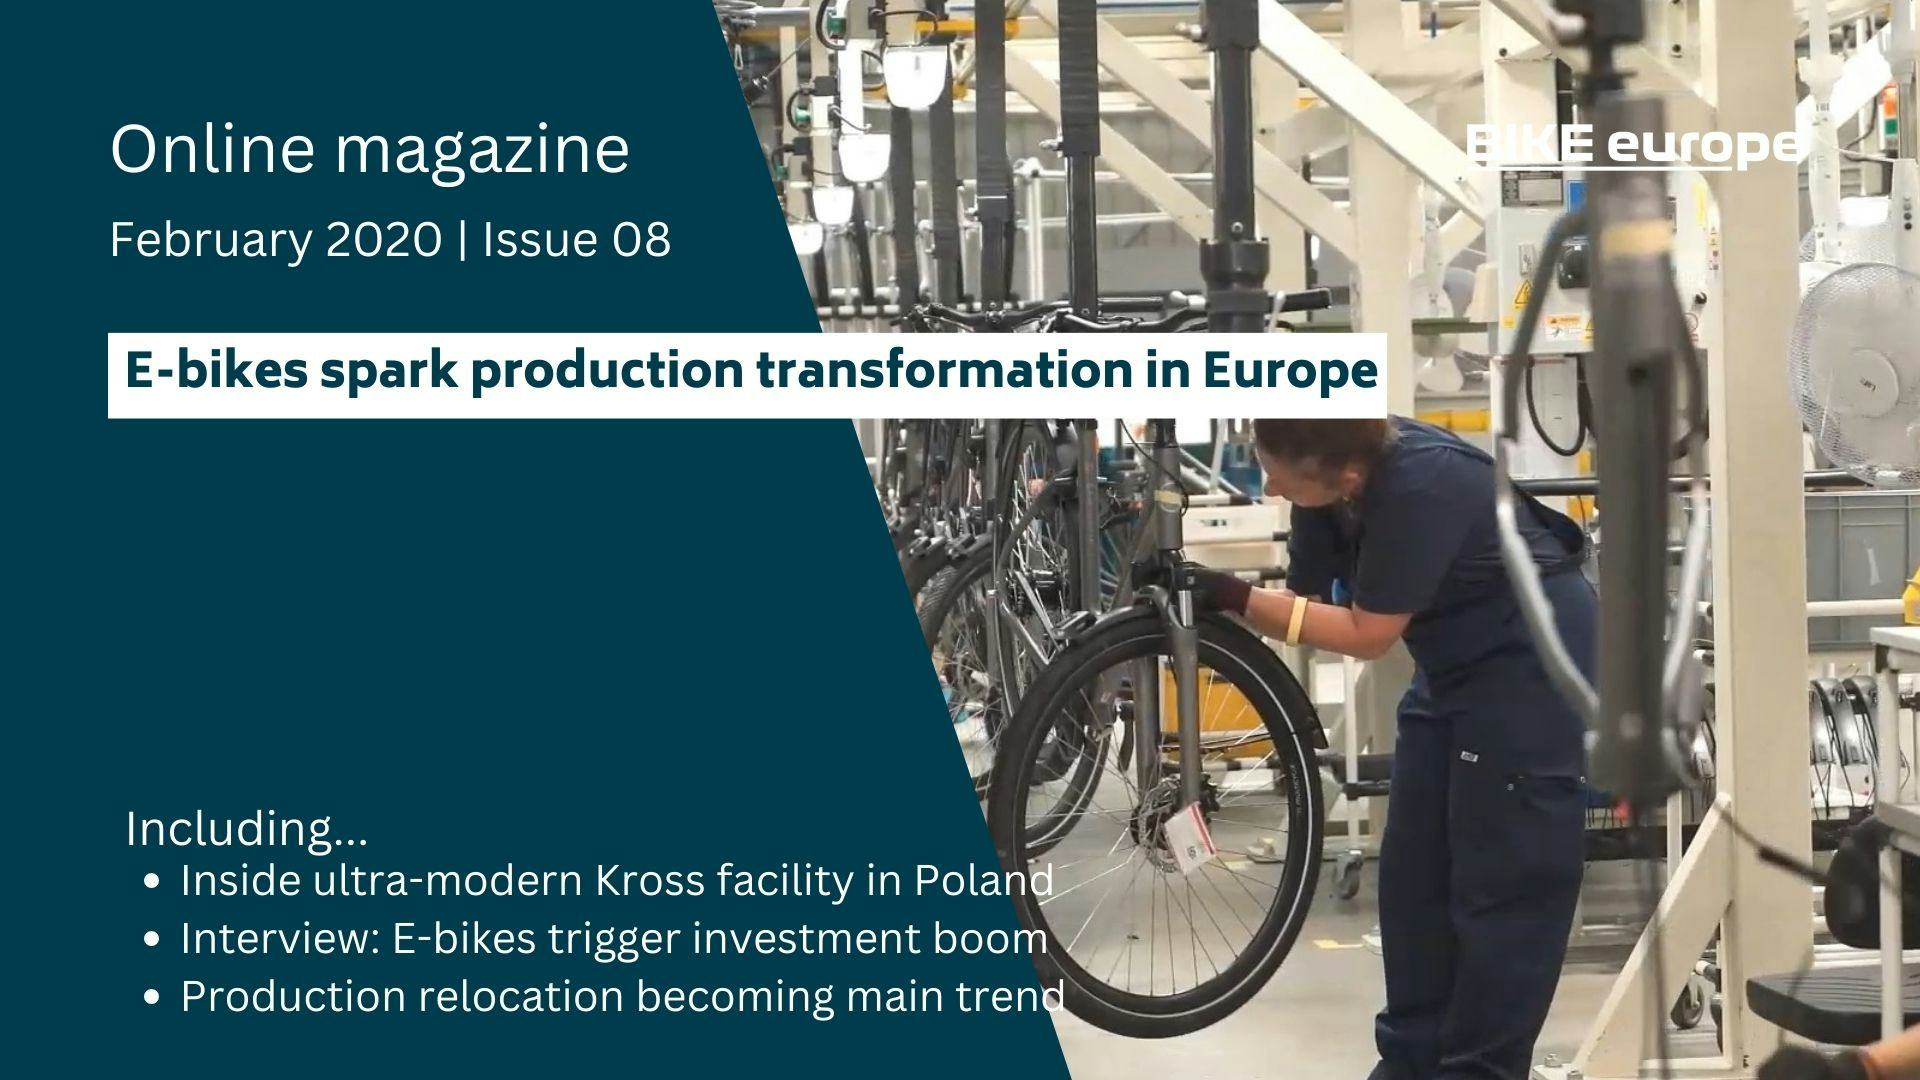 Online magazine: E-bikes spark production transformation in Europe